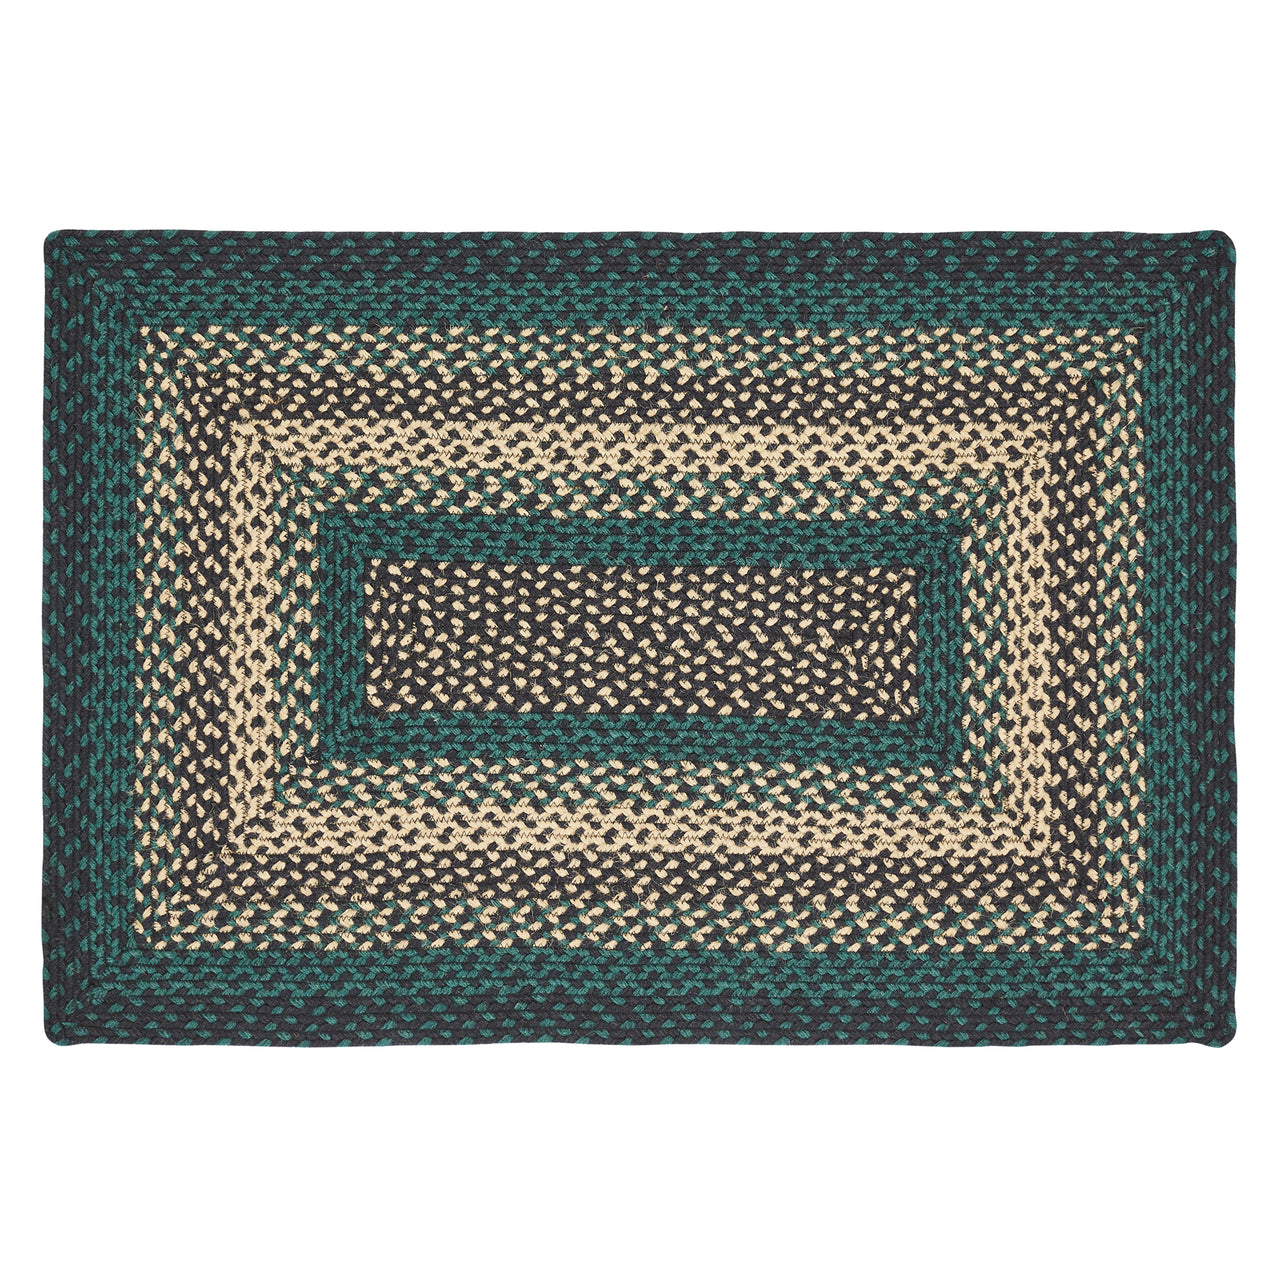 Pine Grove Jute Braided Rug Rect. with Rug Pad 2'x3' VHC Brands